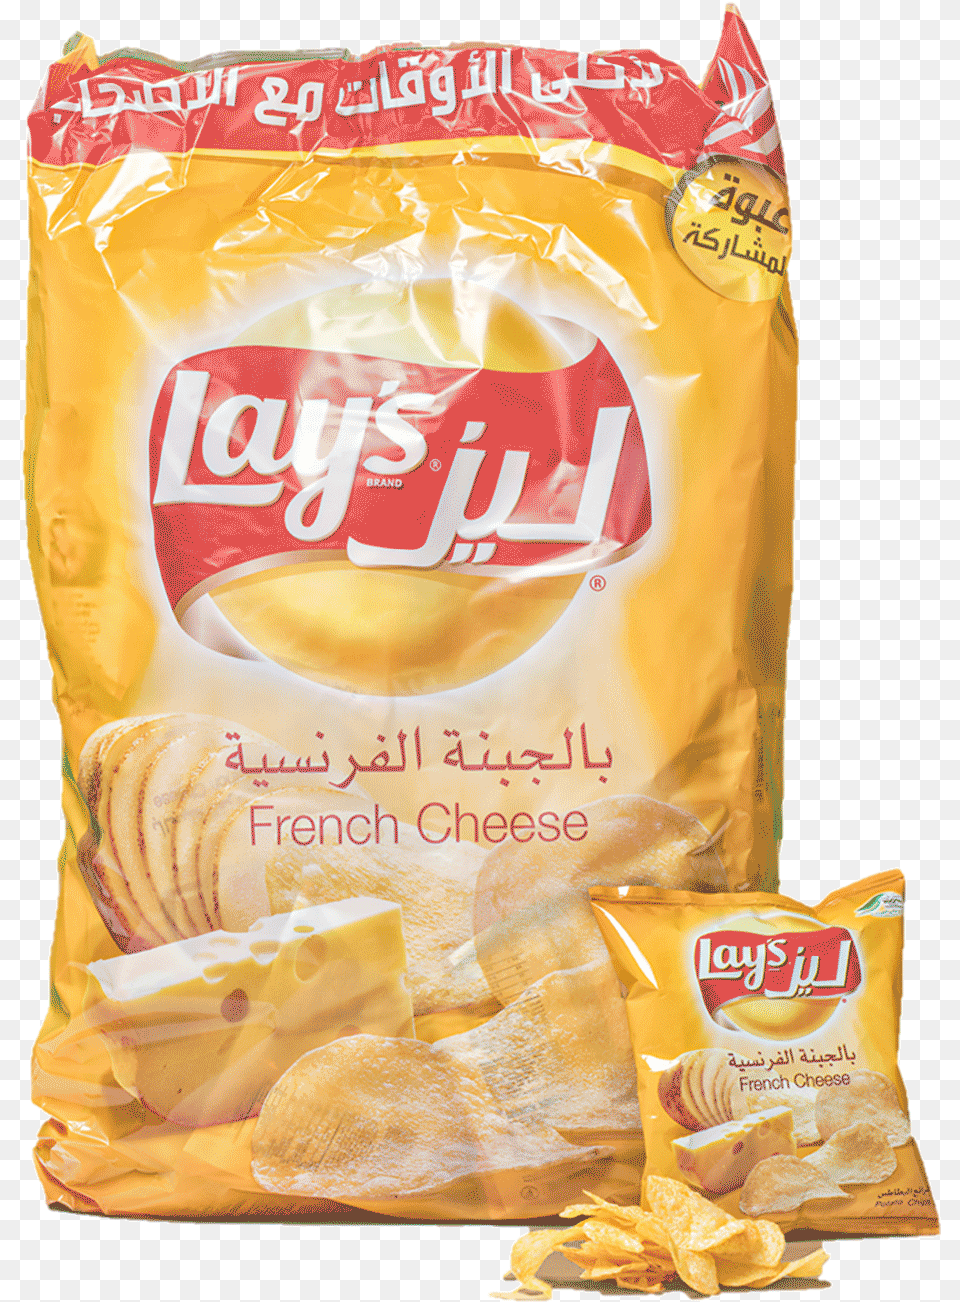 French Cheese 14g21, Bread, Food, Snack, Cracker Png